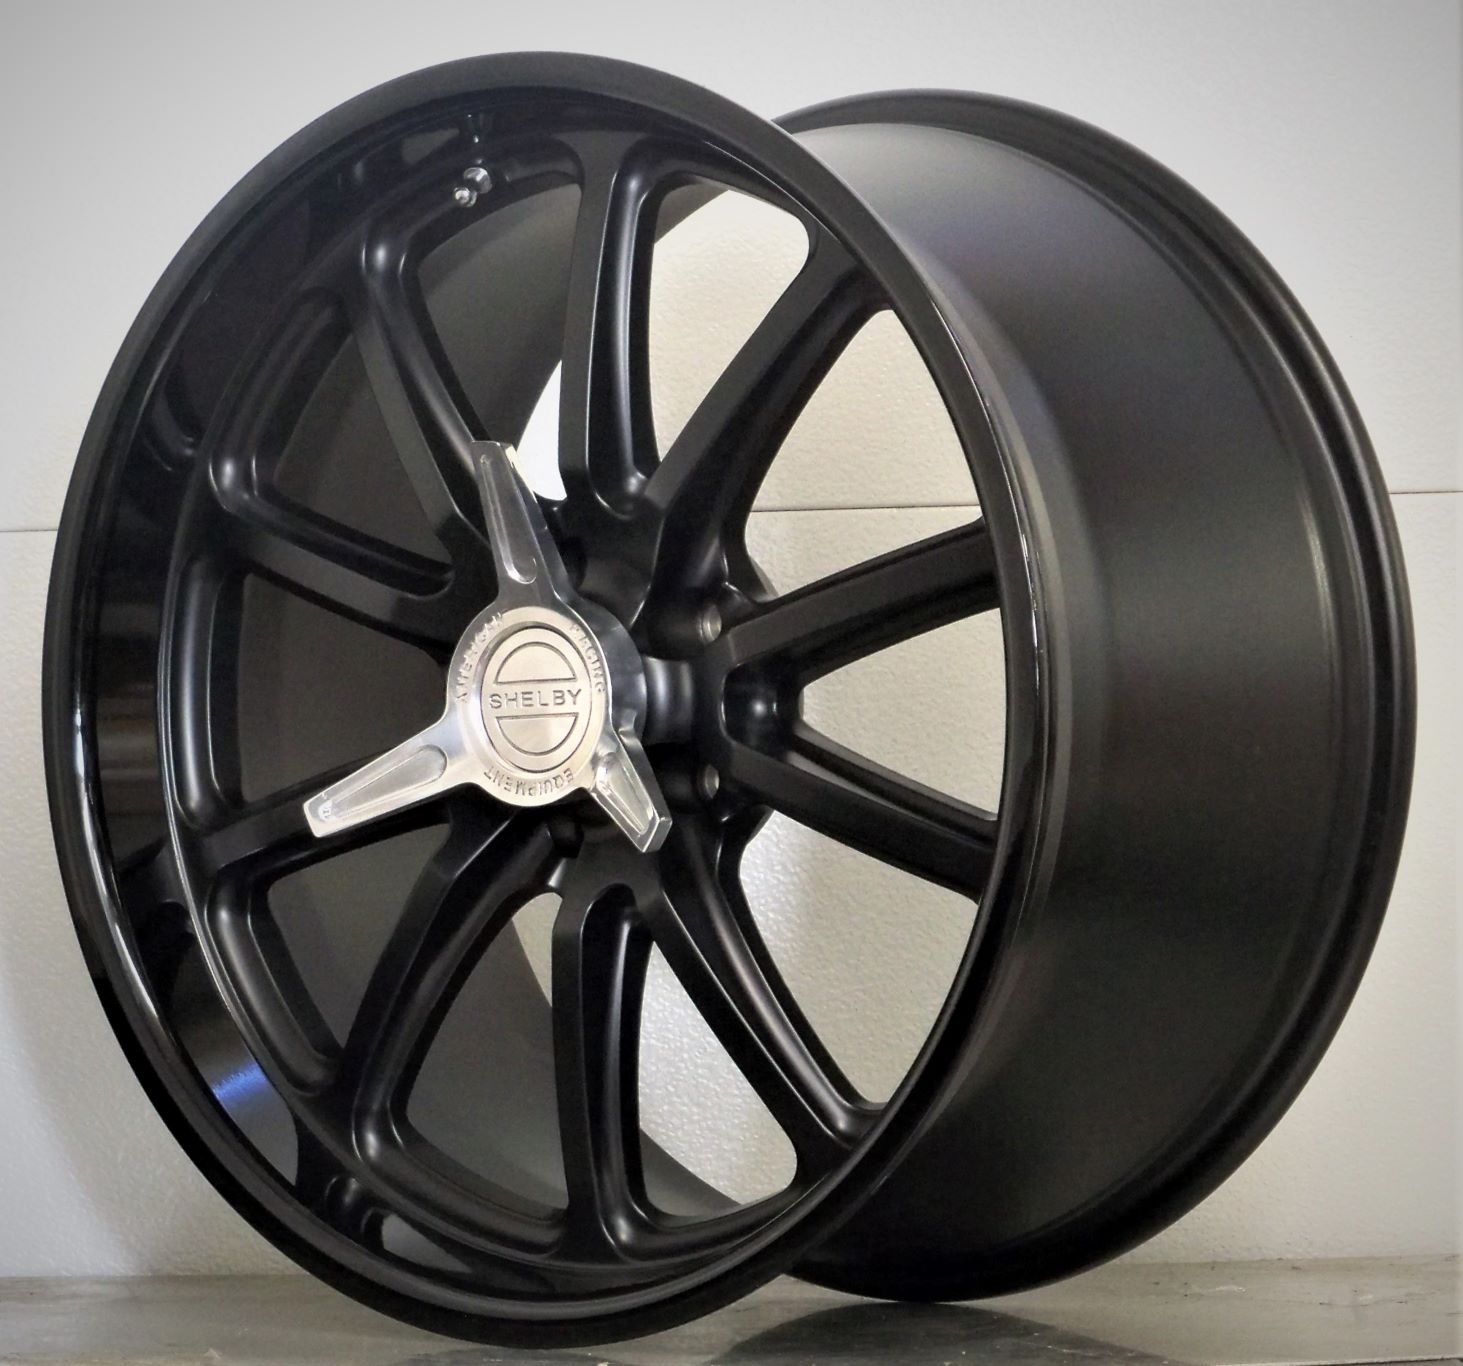 20s set of 4 RSB US Mags Shelby spinners Satin Black 05-20